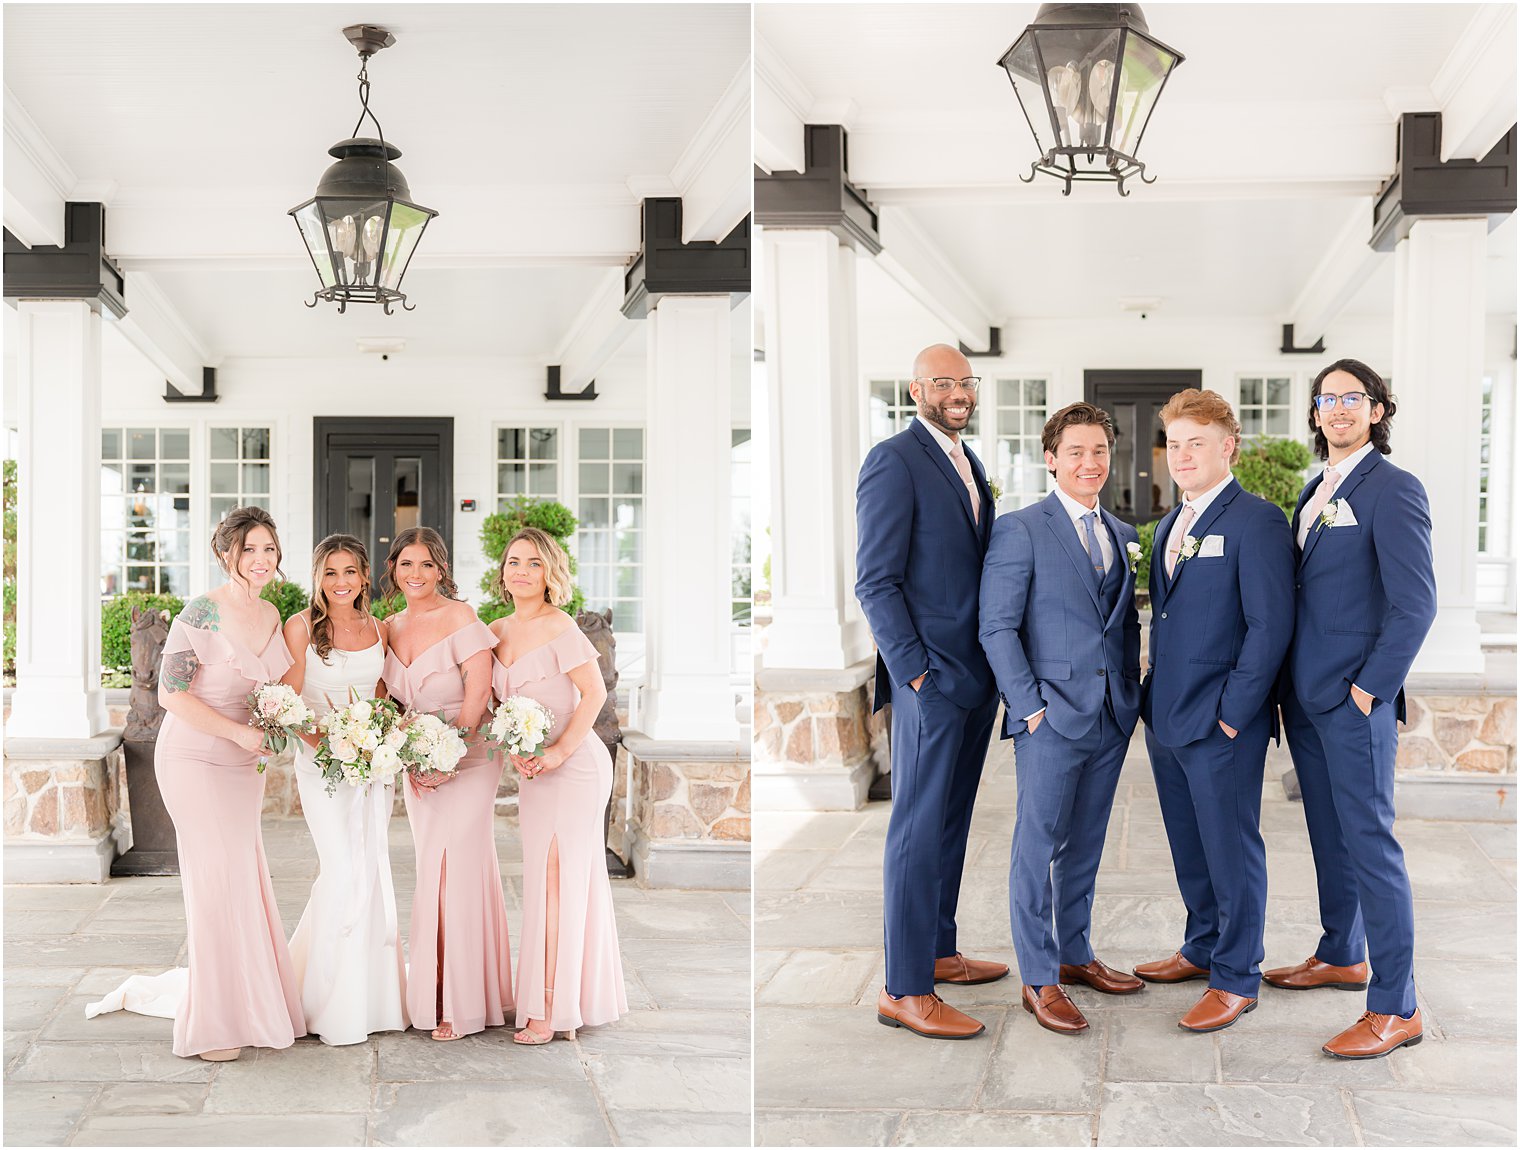 bride and groom stand with wedding party in pink dresses and navy suits